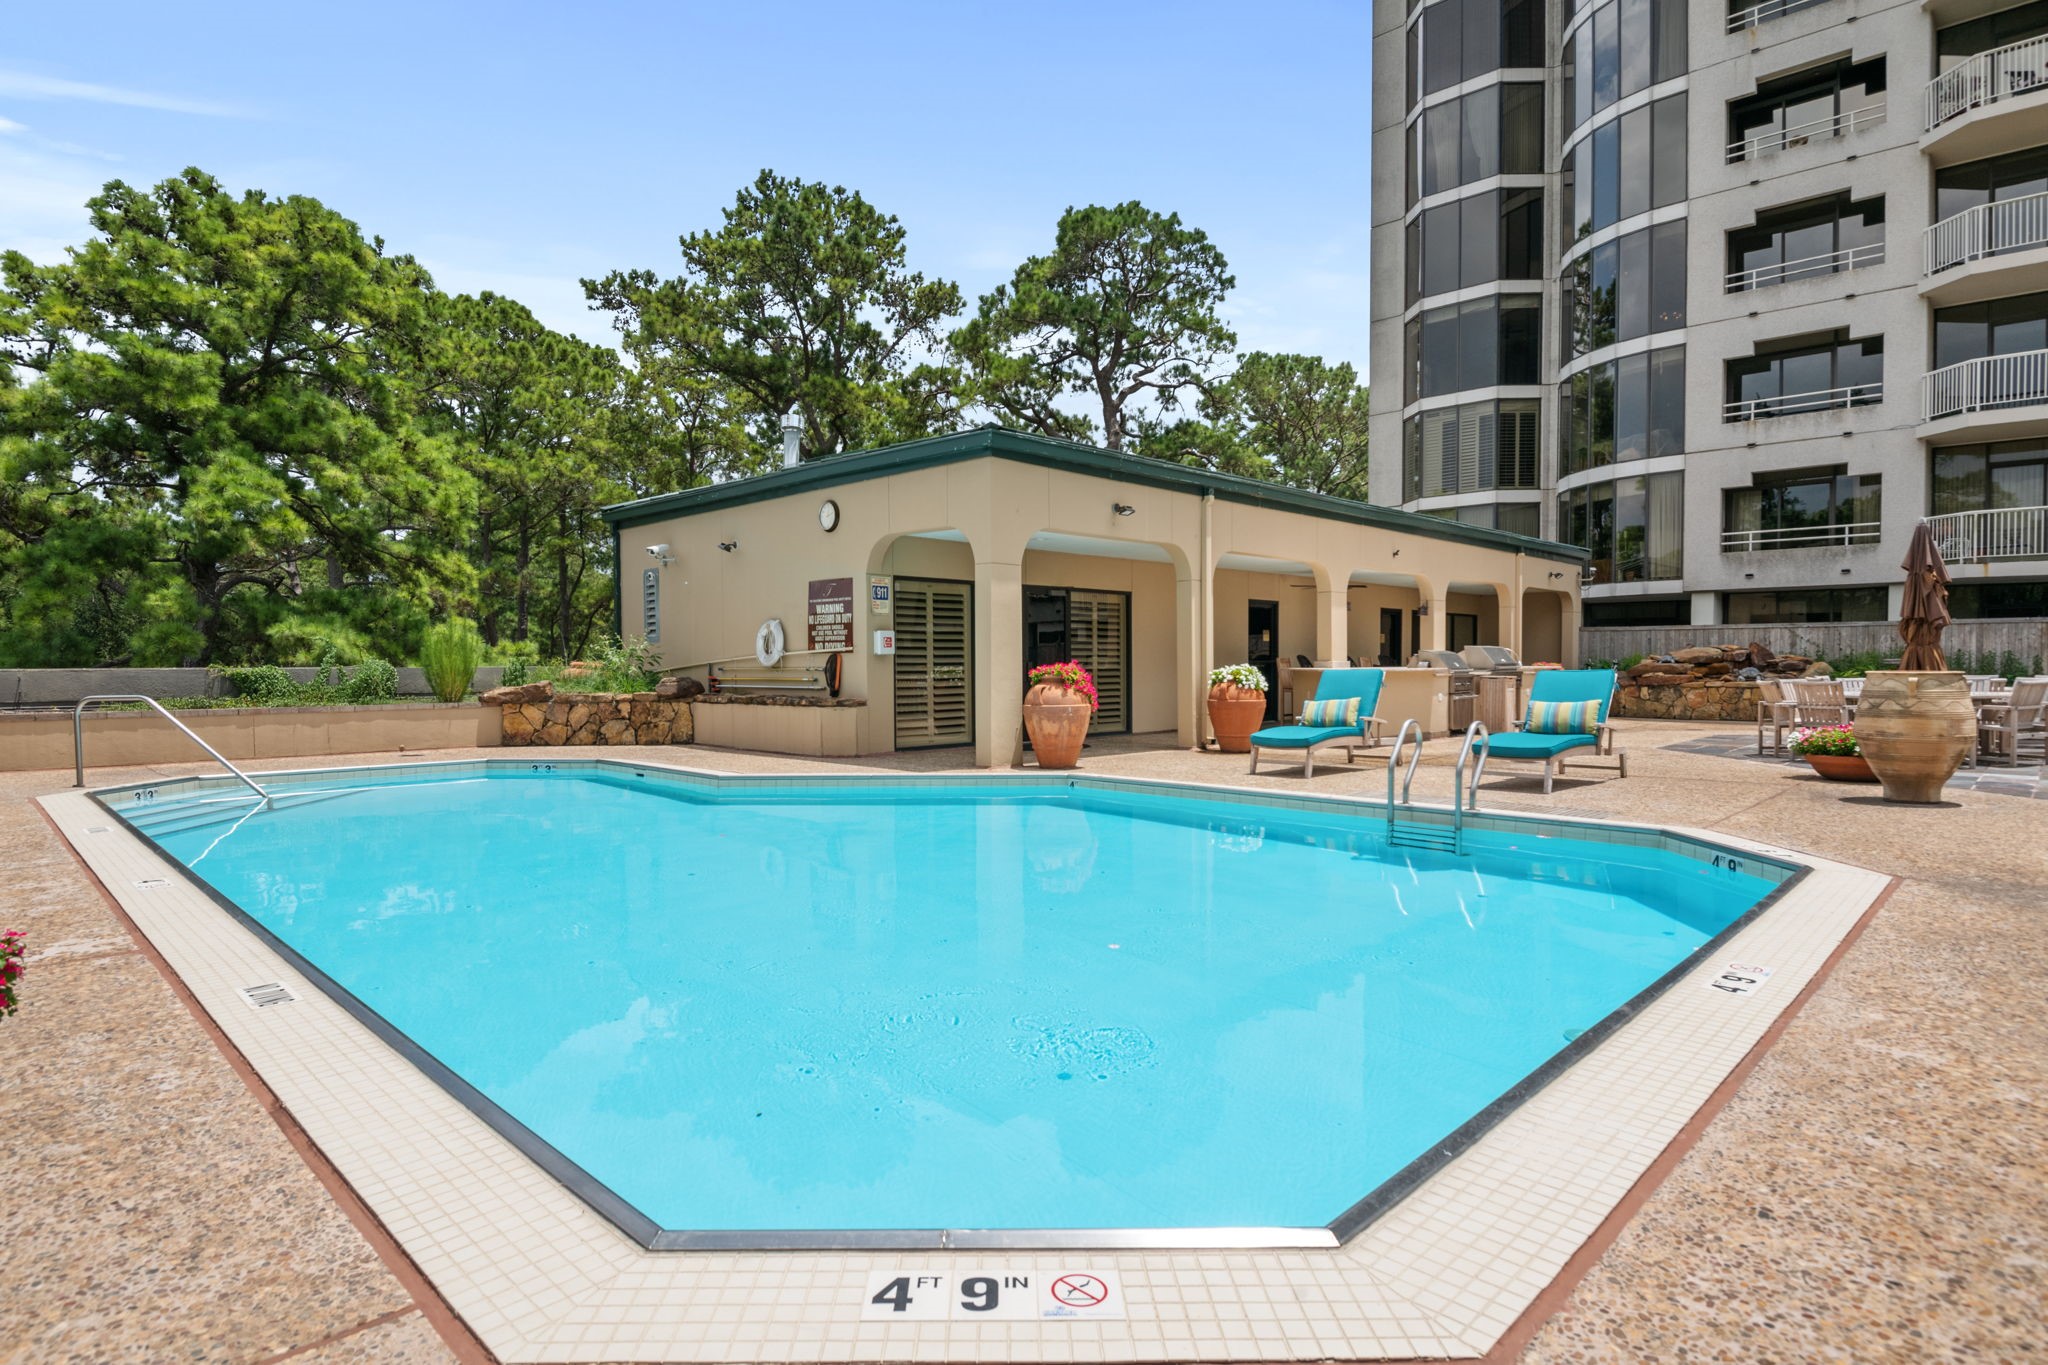 The Tealstone pool - 
Outdoor kitchen with 2 grilling areas is in the background.